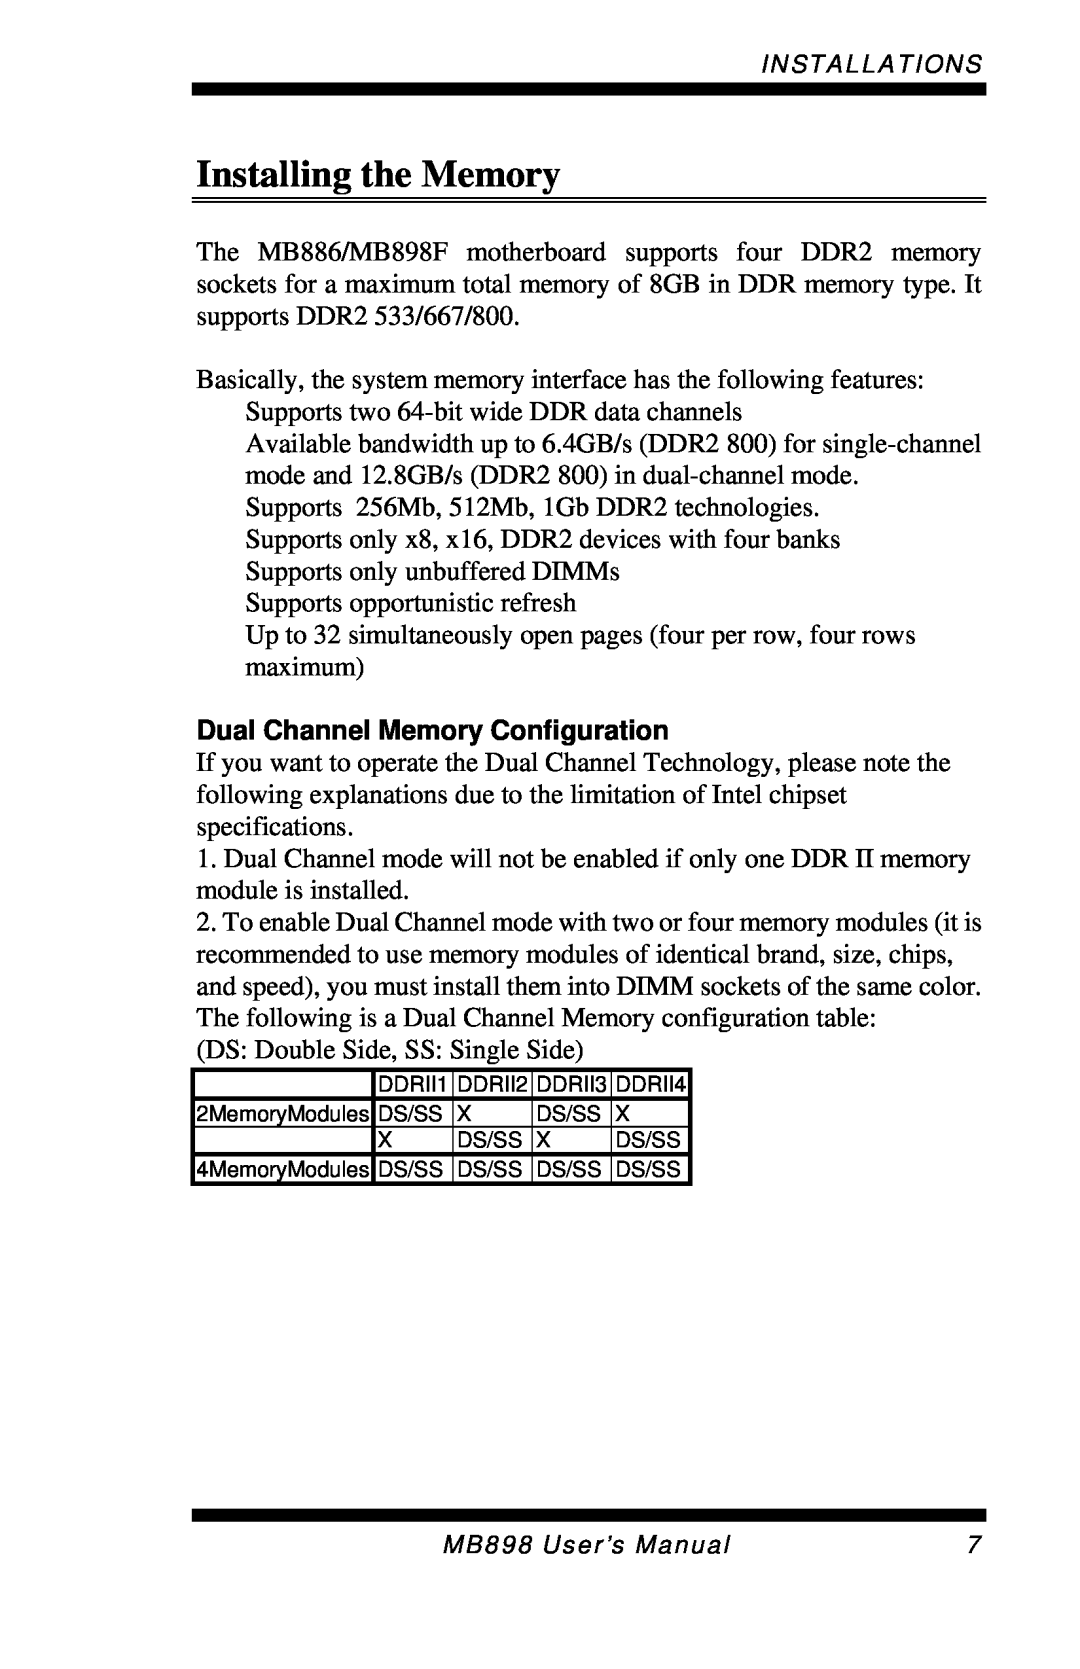 Intel MB898F, MB898RF user manual Installing the Memory, Dual Channel Memory Configuration 